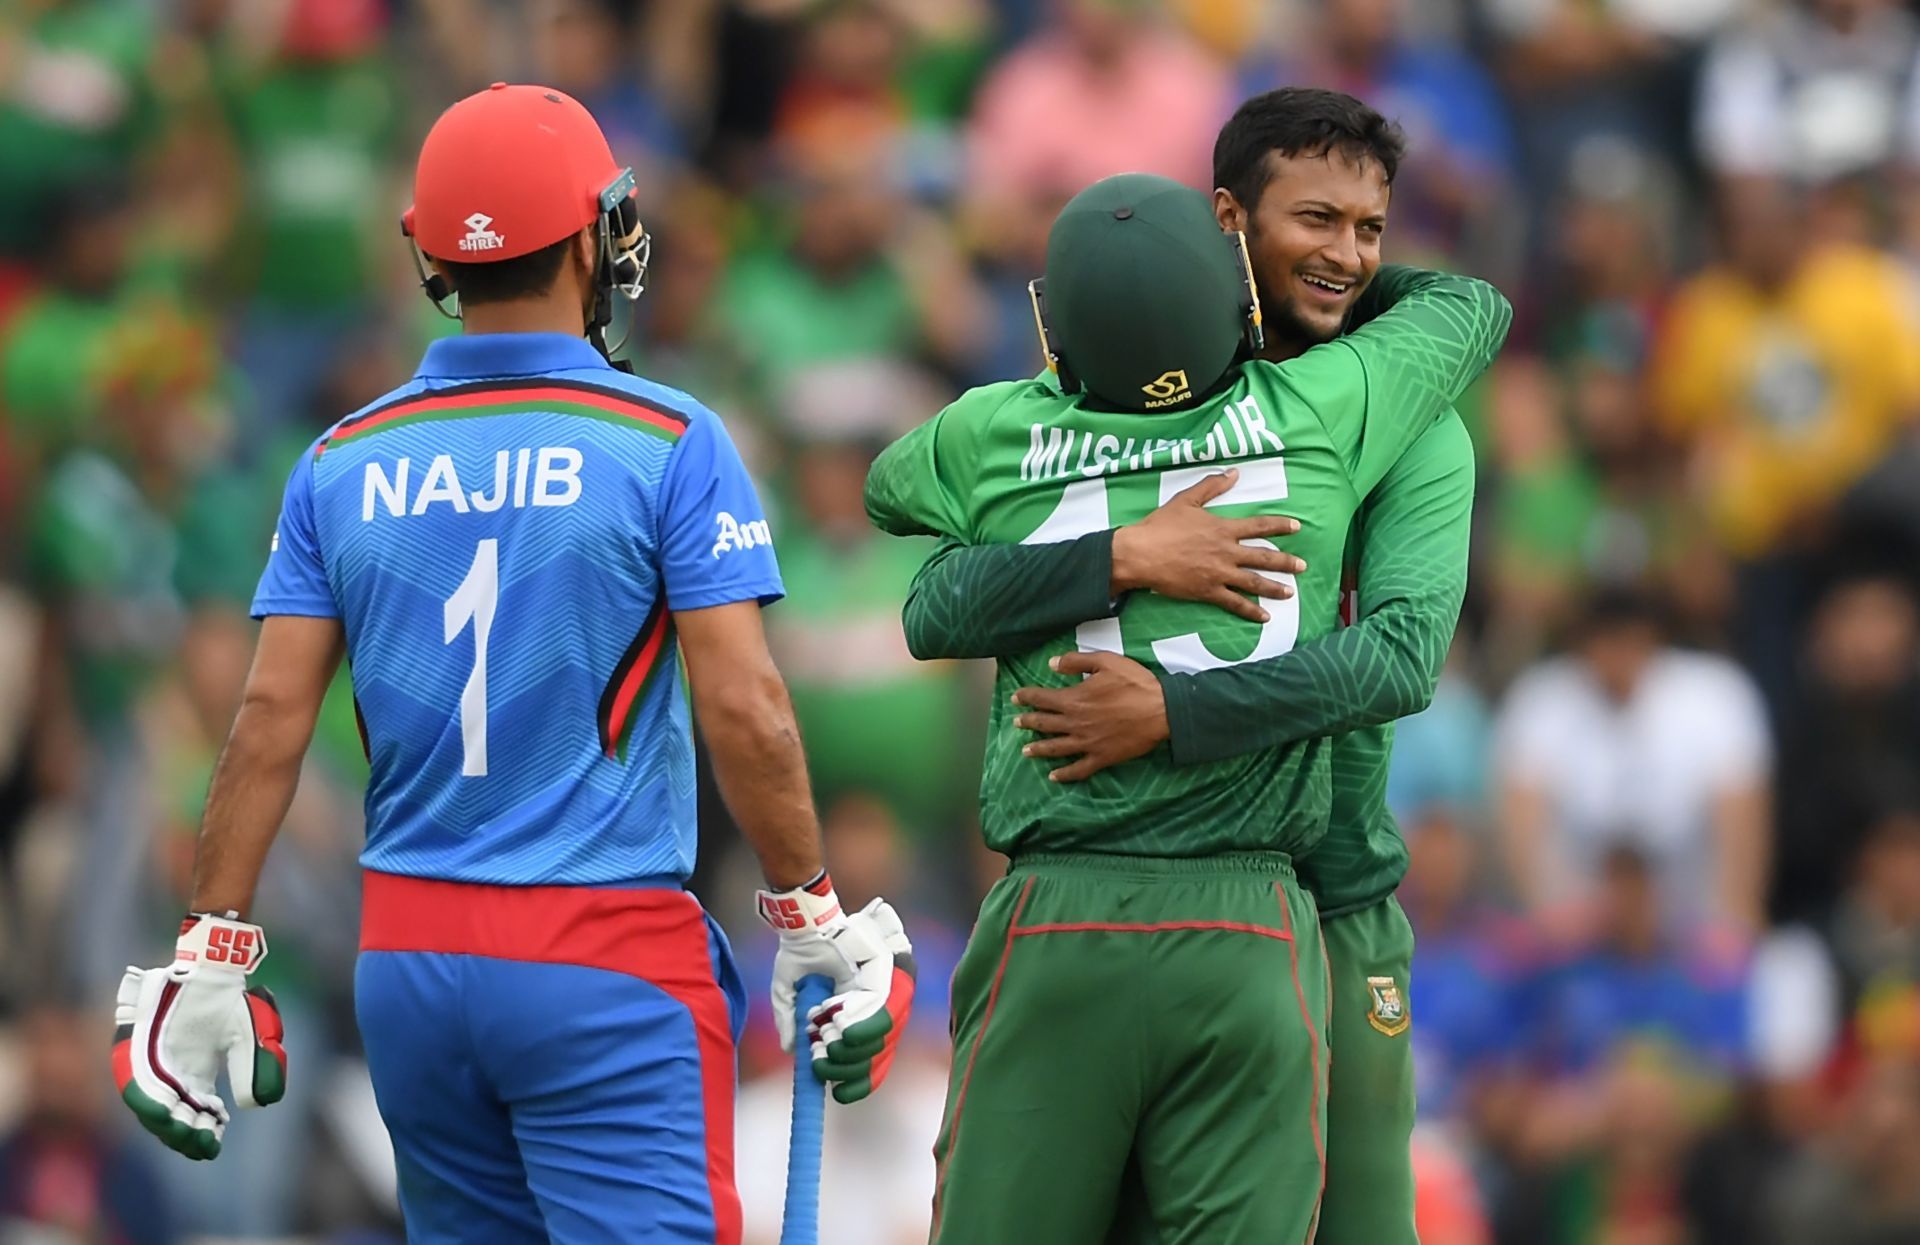 Shakib Al Hasan set a new record in ICC T20 World Cup history today